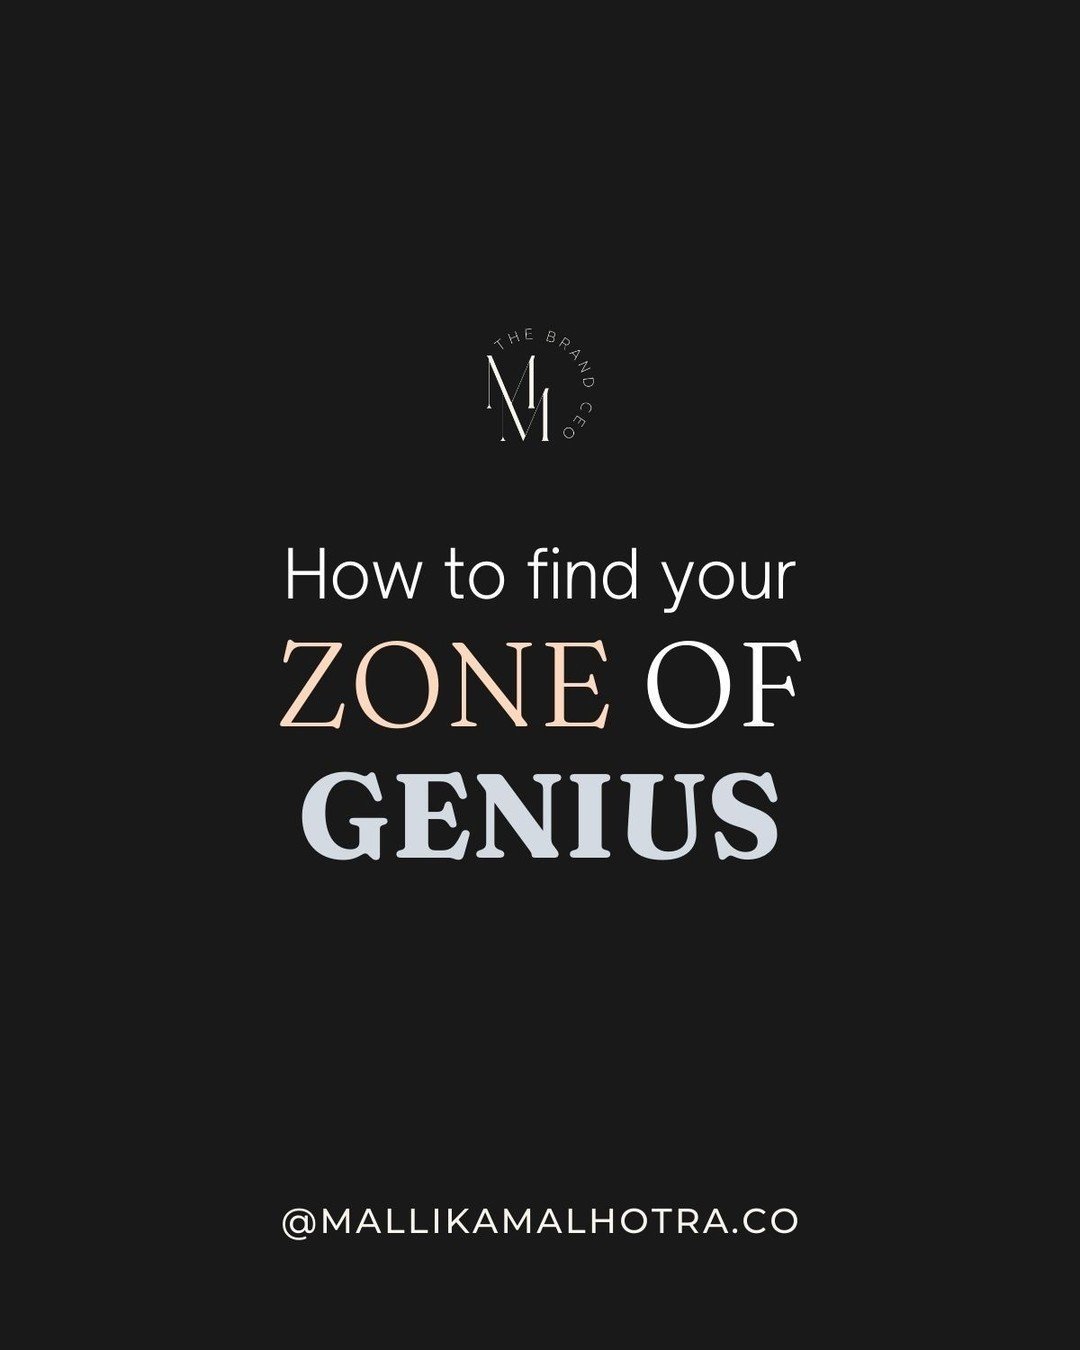 It&rsquo;s the sweet spot where your deepest passion meets your unparalleled skills, wrapped in the ribbon of your core values. It's not just what you do&mdash;it's what you're meant to do. And when you tap into this zone, you don't just chase succes